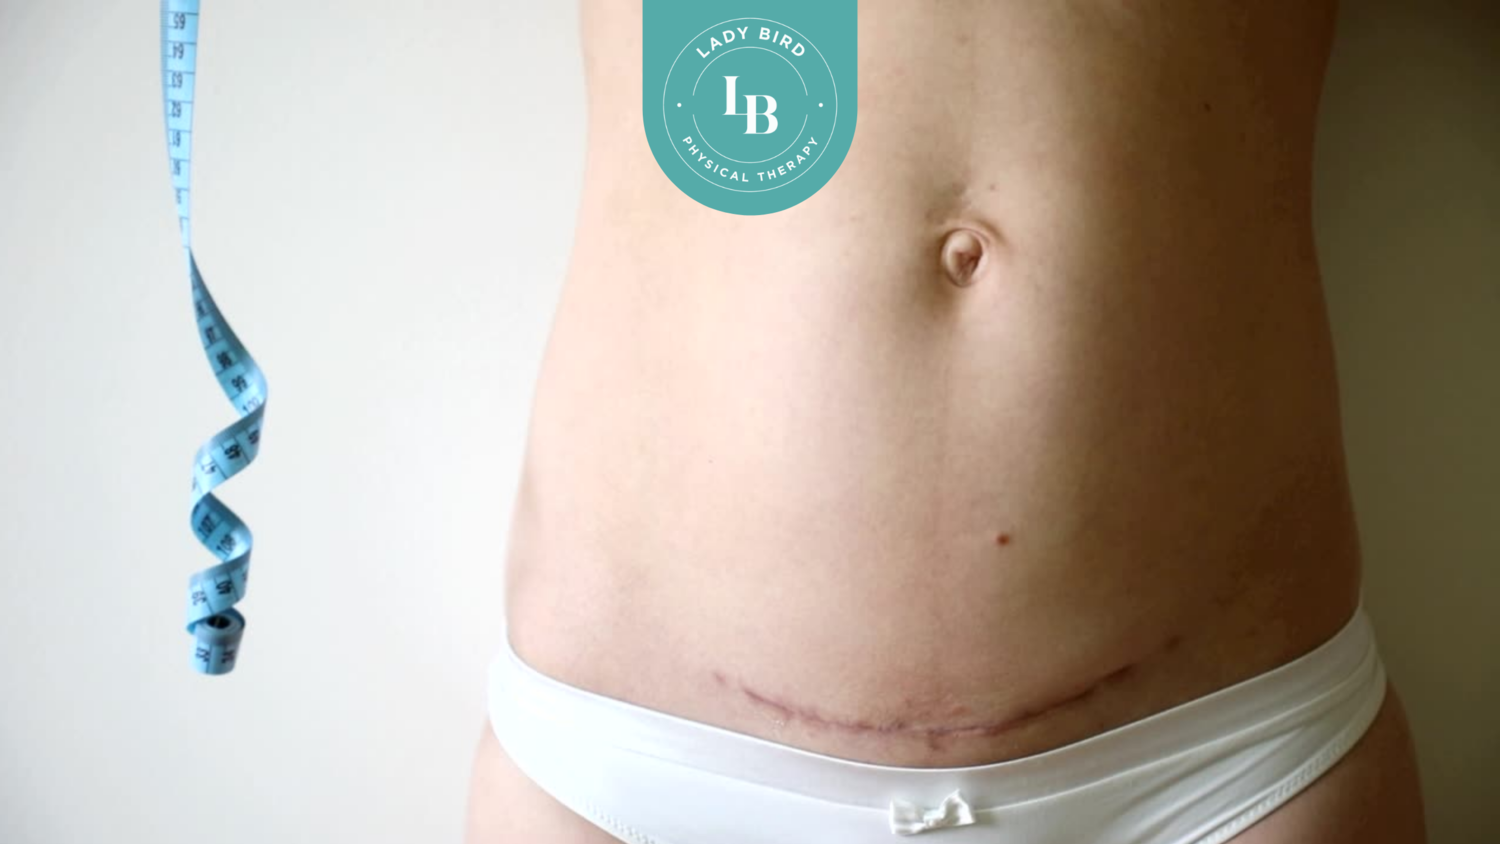 Is it safe to laser over a C-section scar? 